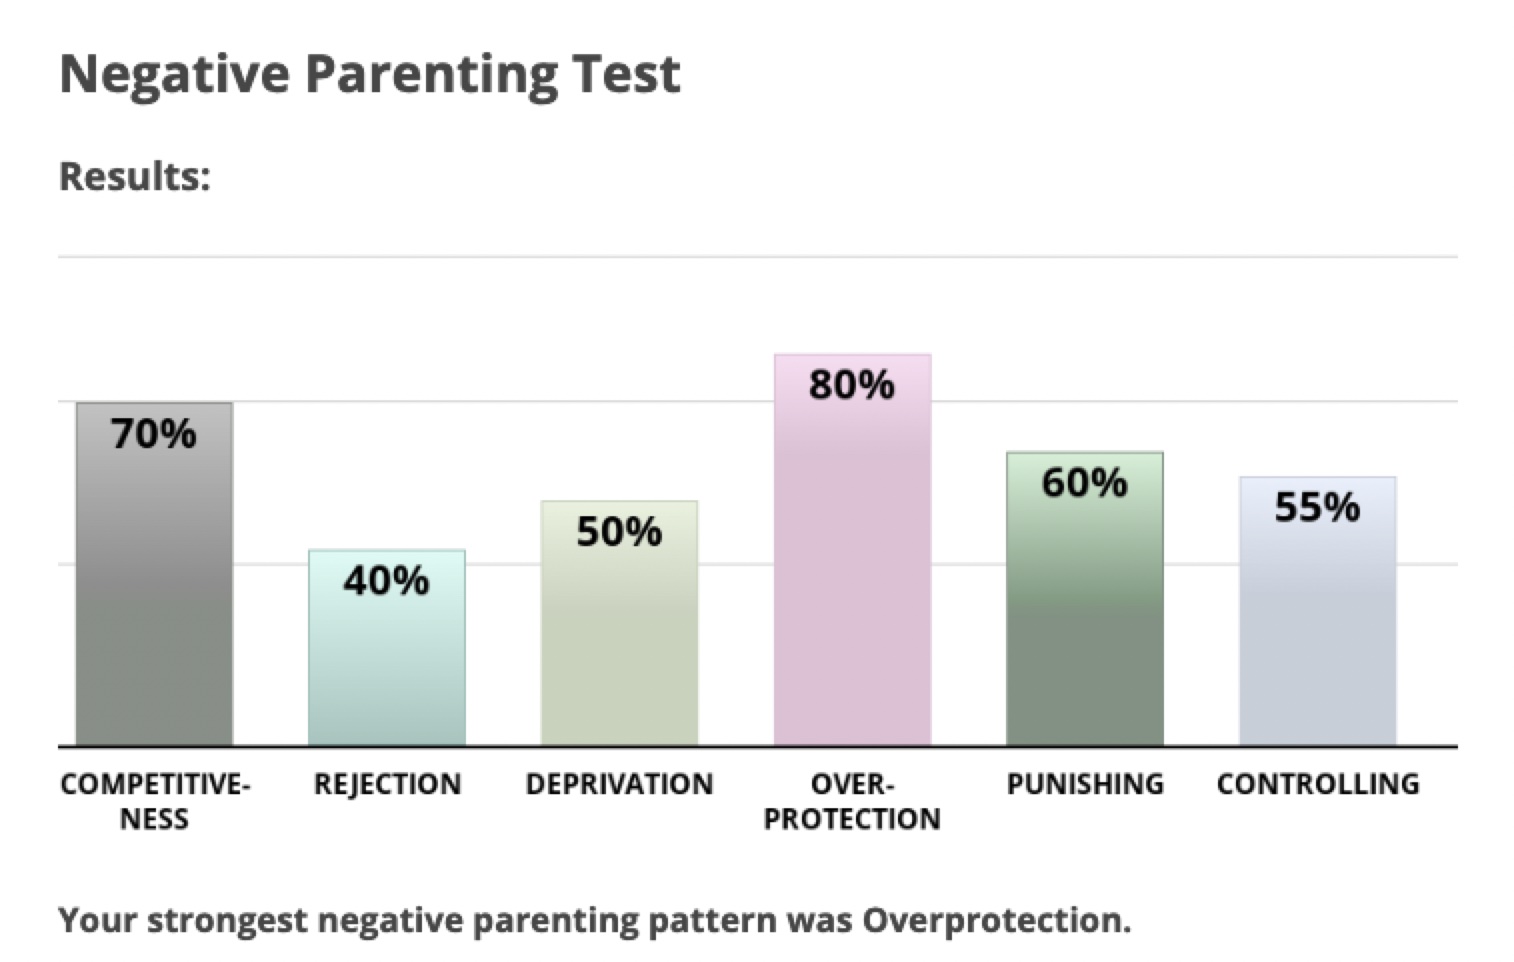 Graph showing results of the "Negative Parenting Test"